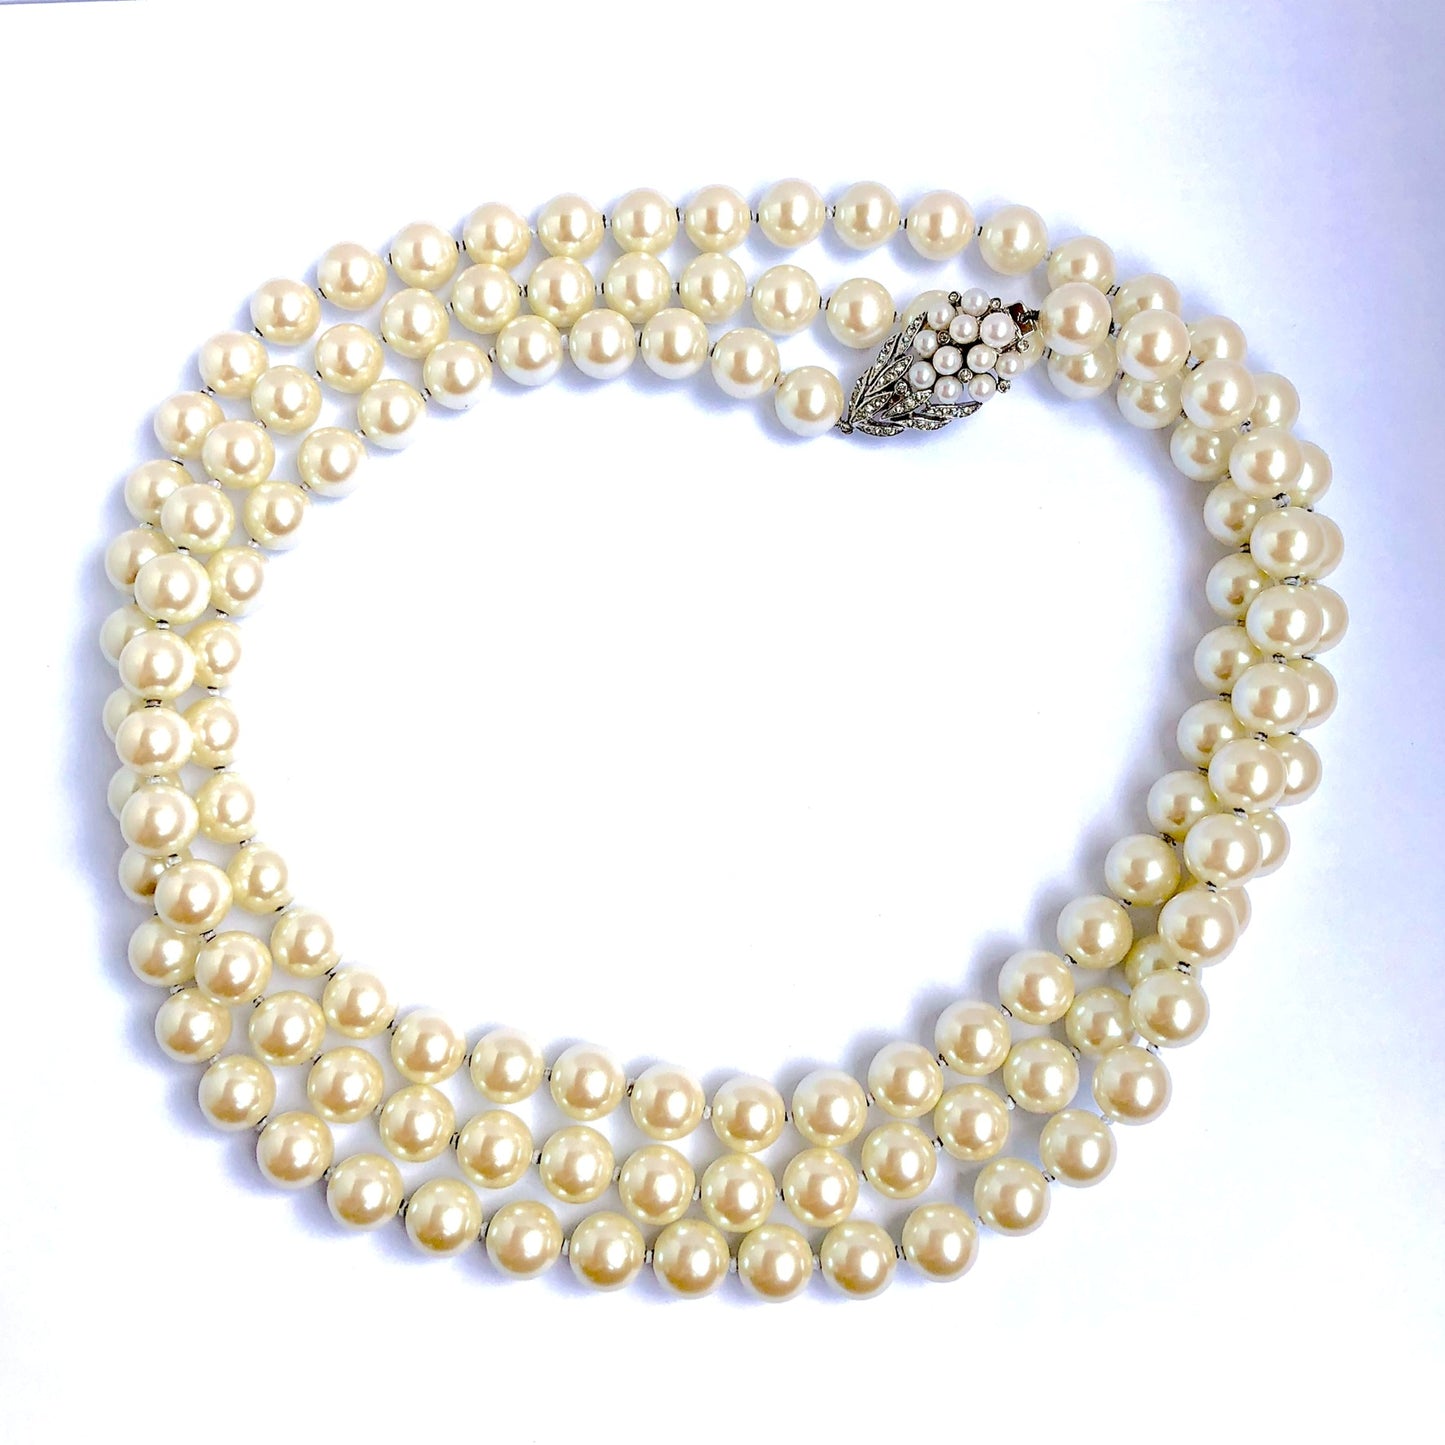 Champagne Faux PEARLS NECKLACE 27” Long Silver Detail Crystals